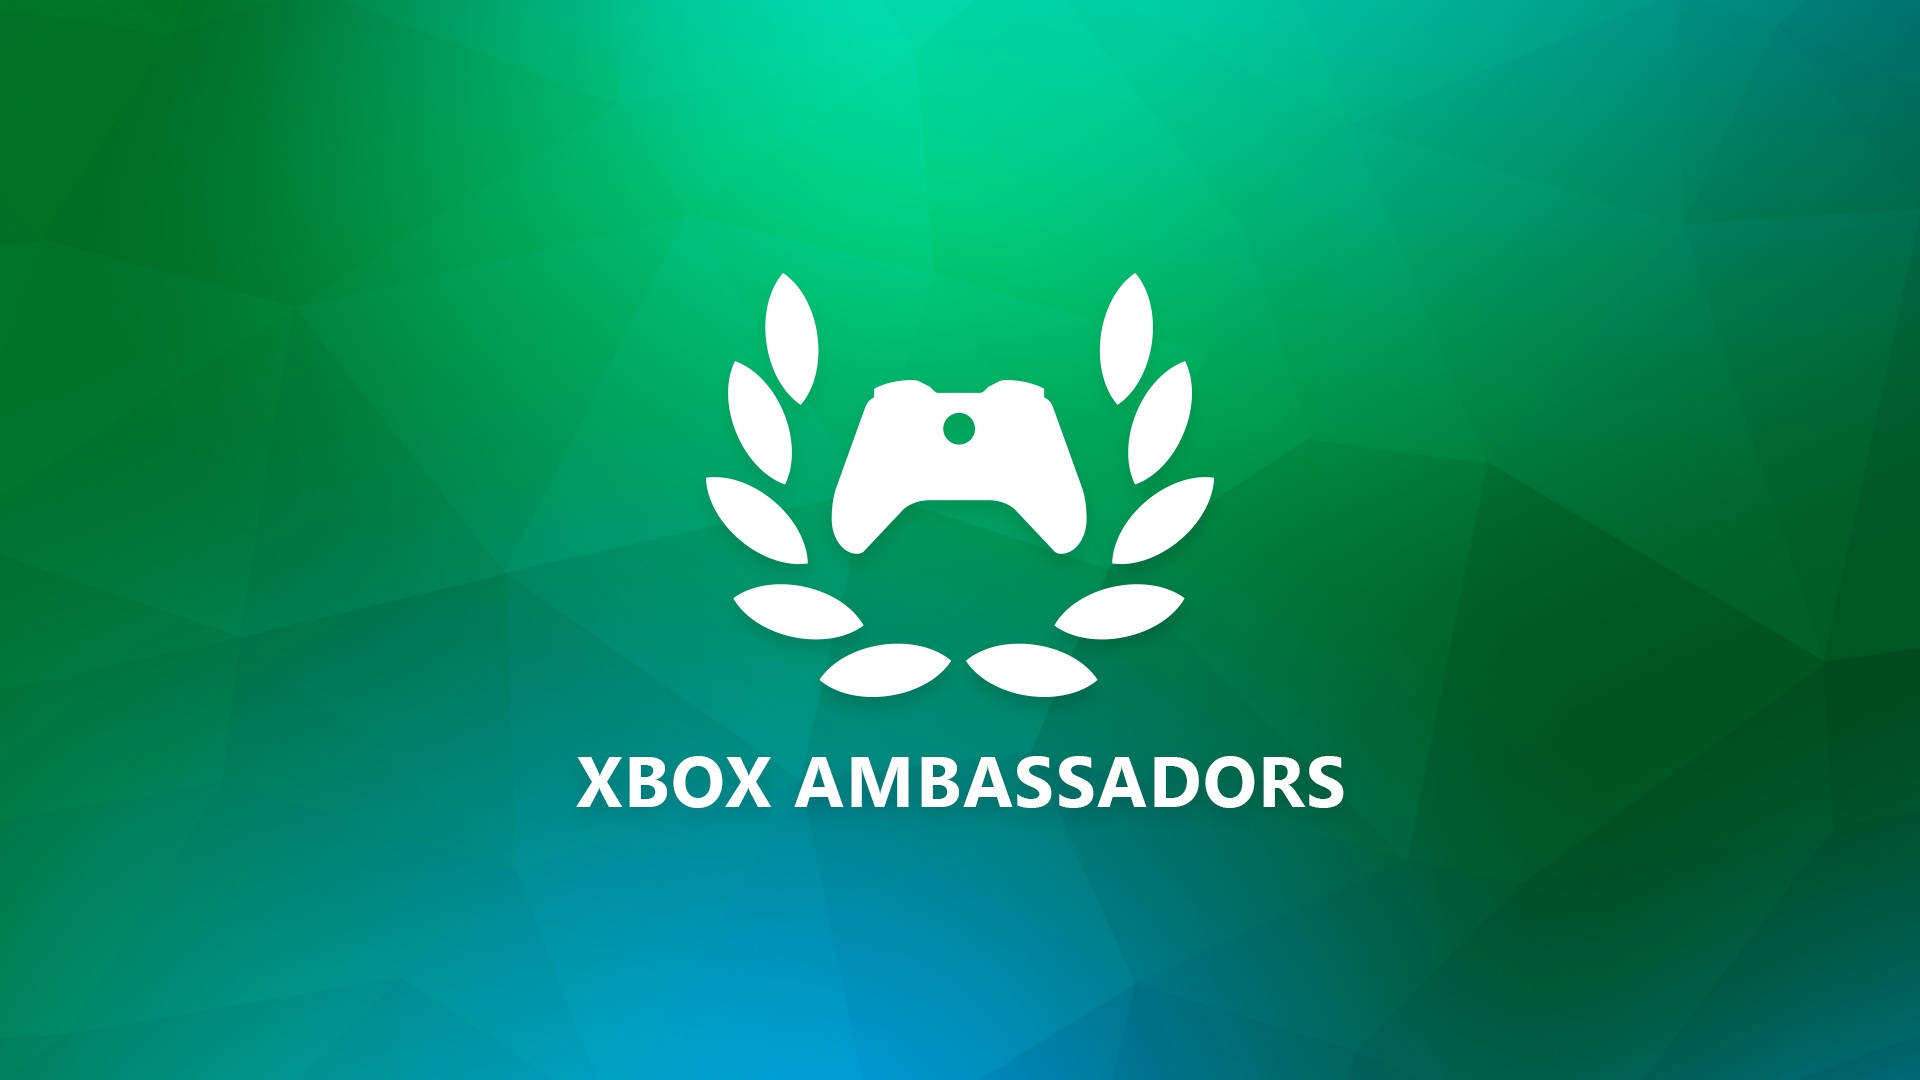 A white Xbox Ambassadors logo is shown in front of a green background with blue hues. The words “Xbox Ambassadors” is shown directly beneath the logo.